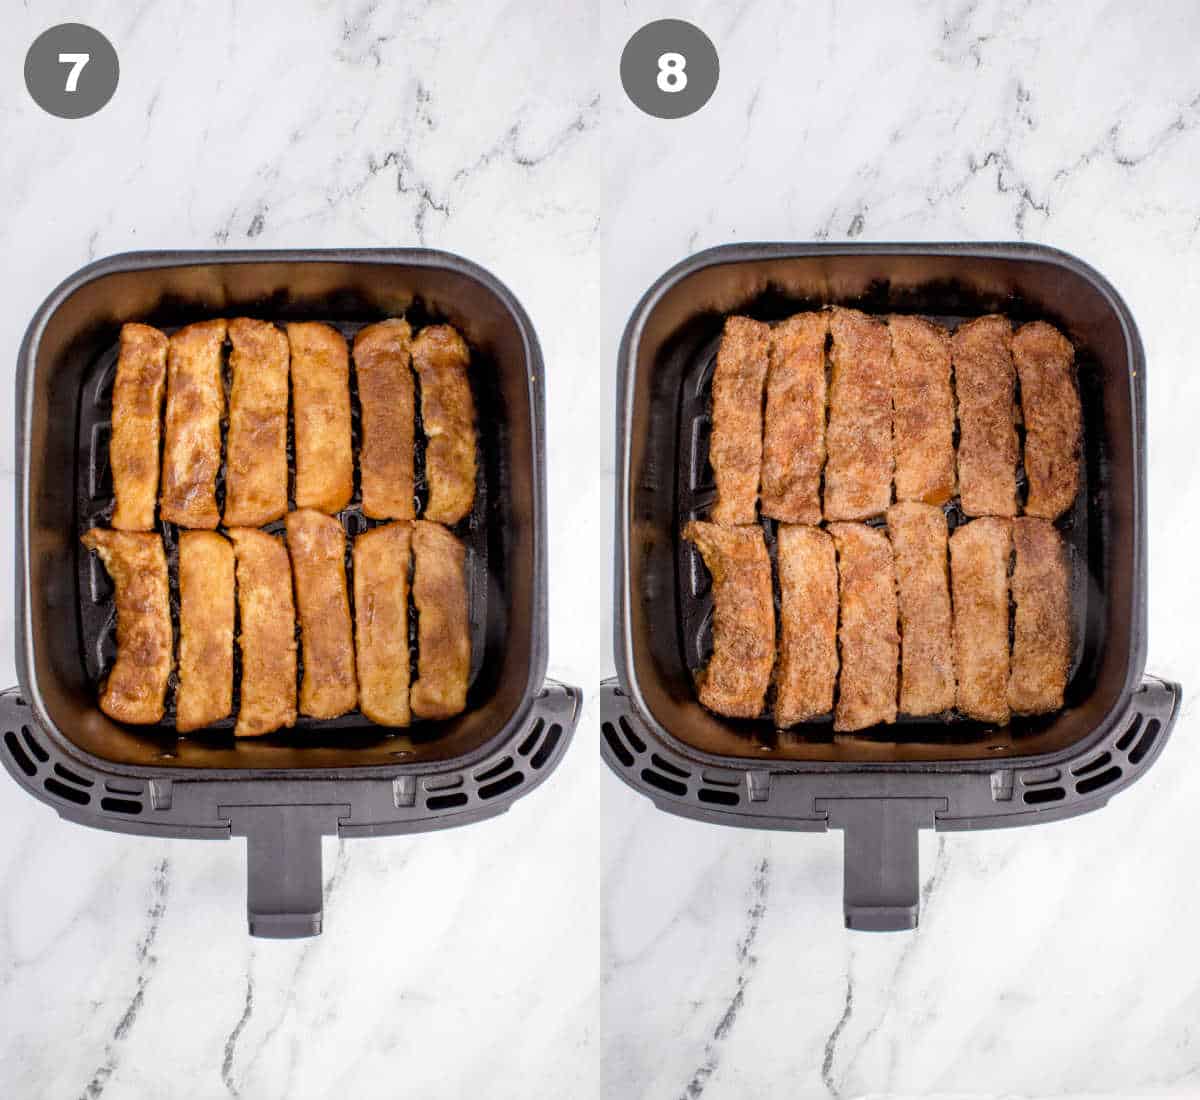 French toast sticks placed into a air fryer basket and fried.